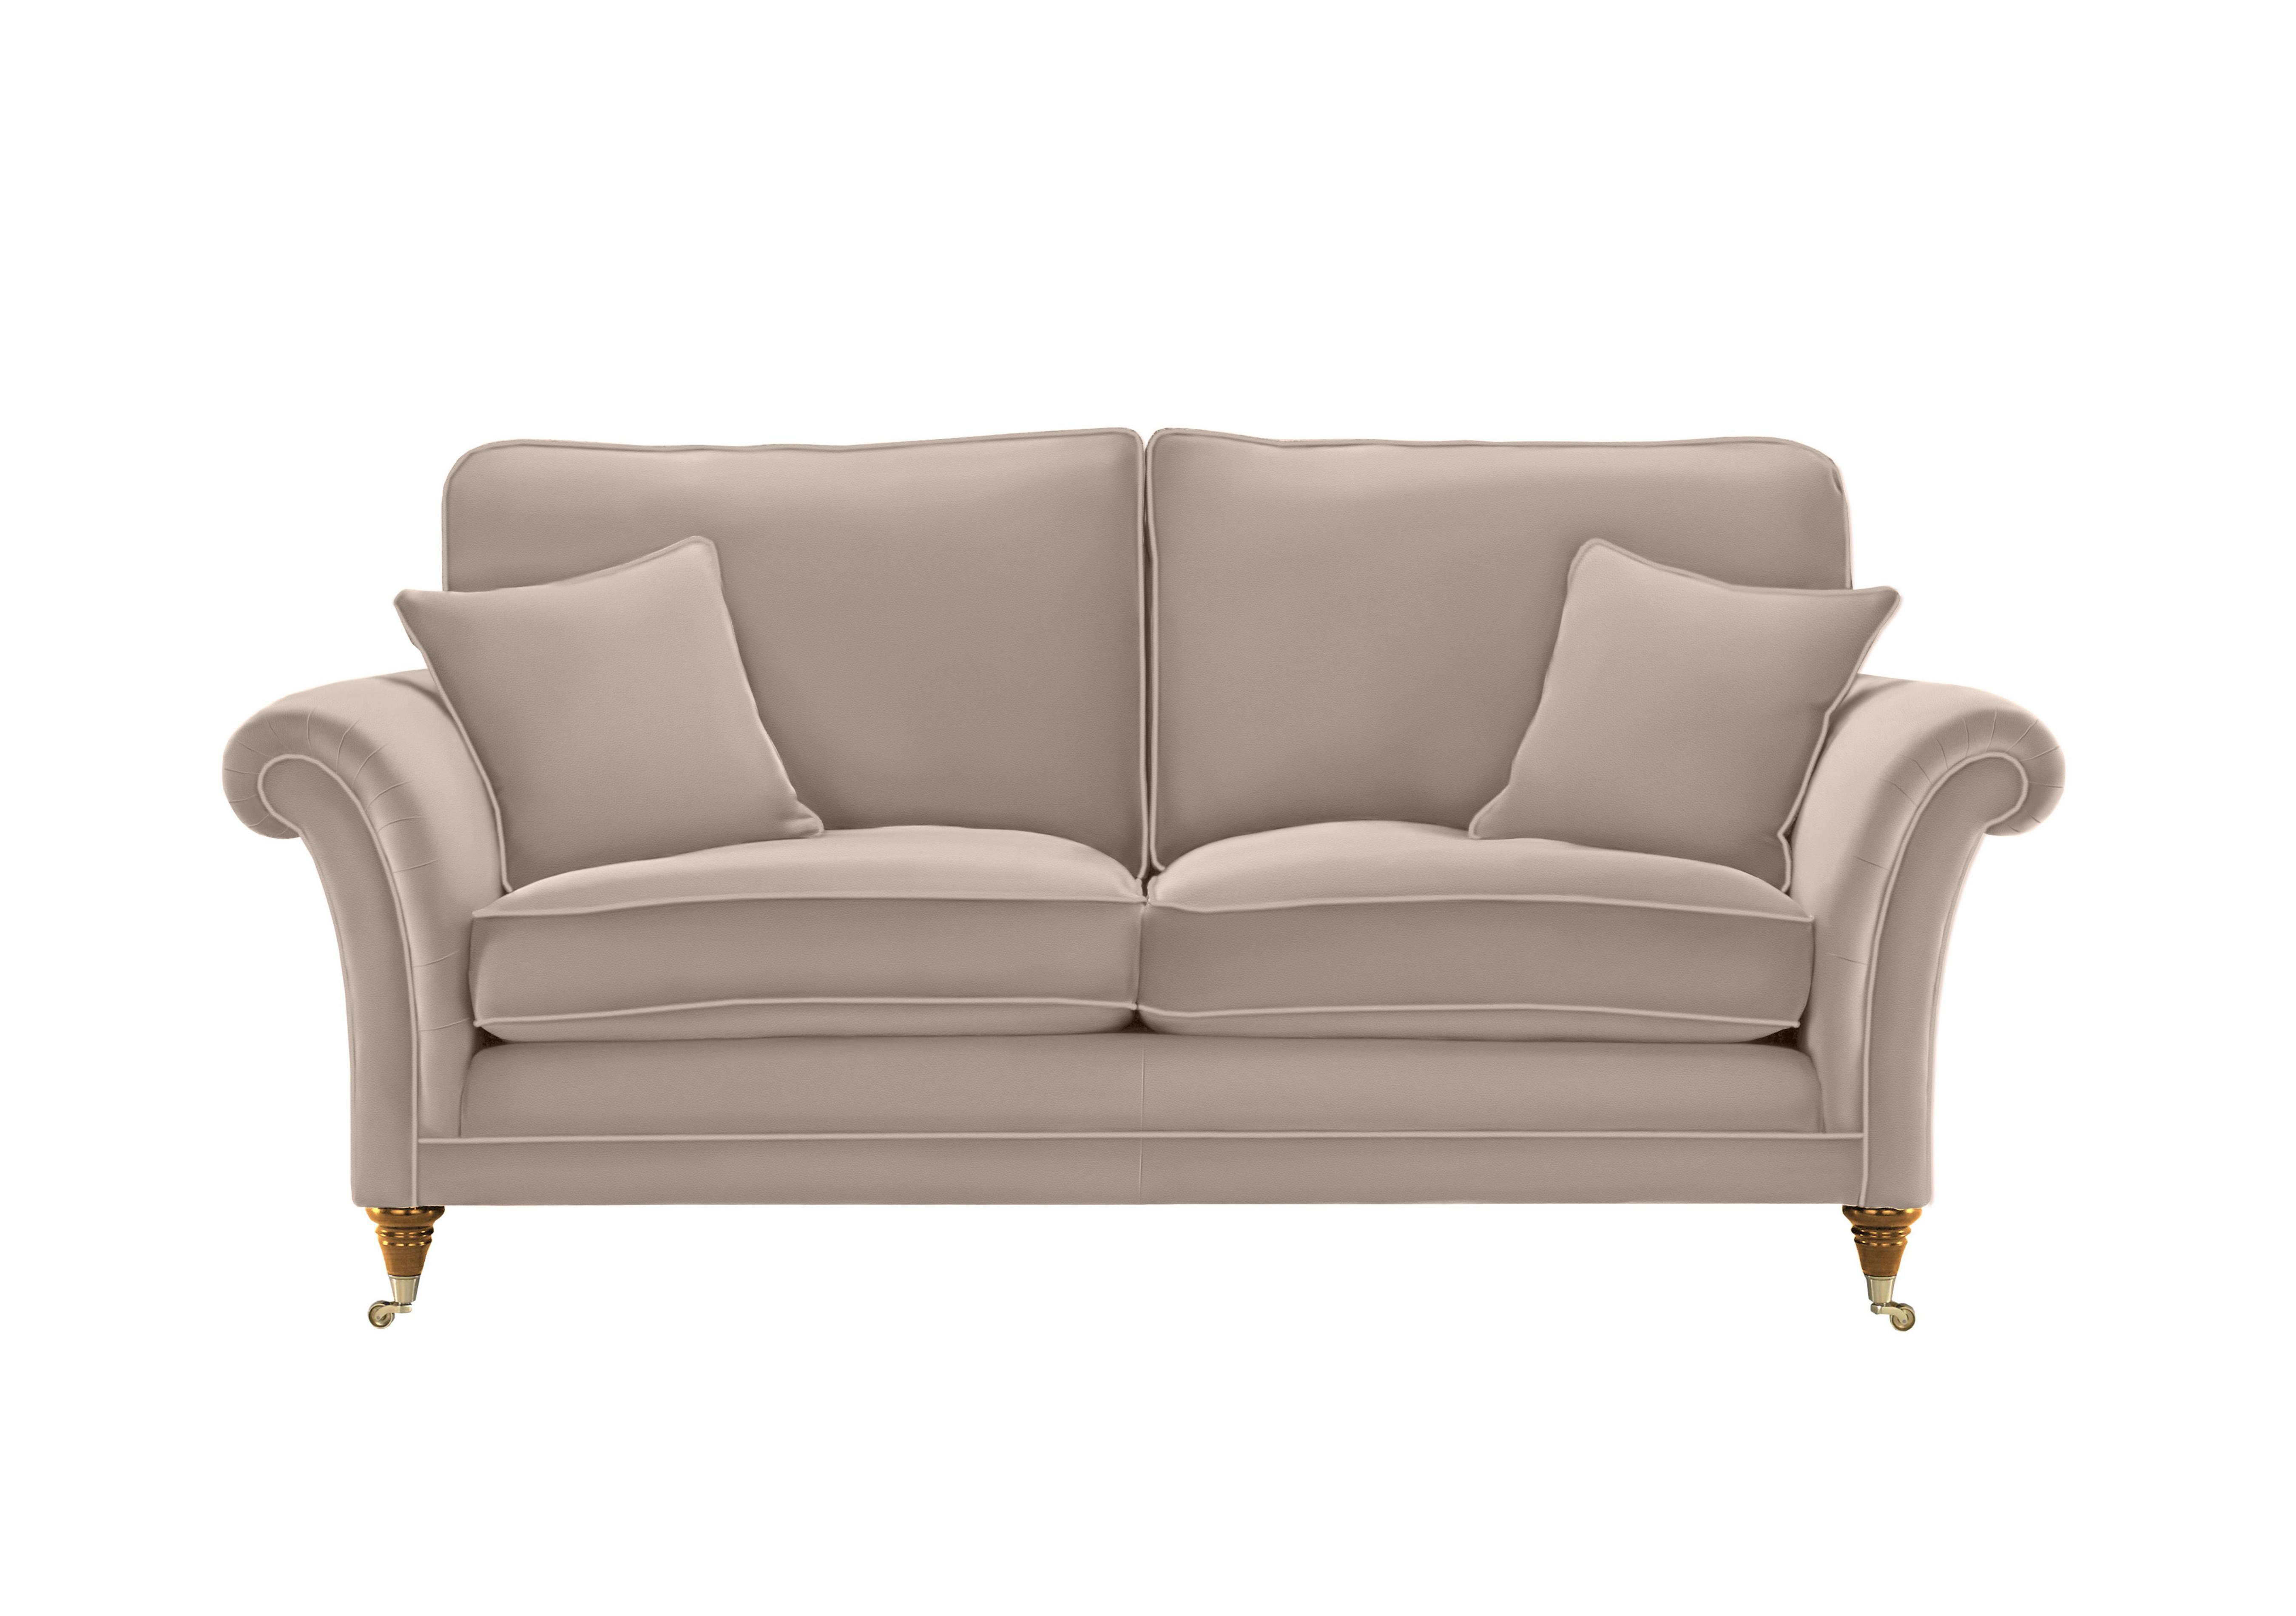 Burghley Large 2 Seater Leather Sofa in 009019-0056 Roma Putty on Furniture Village